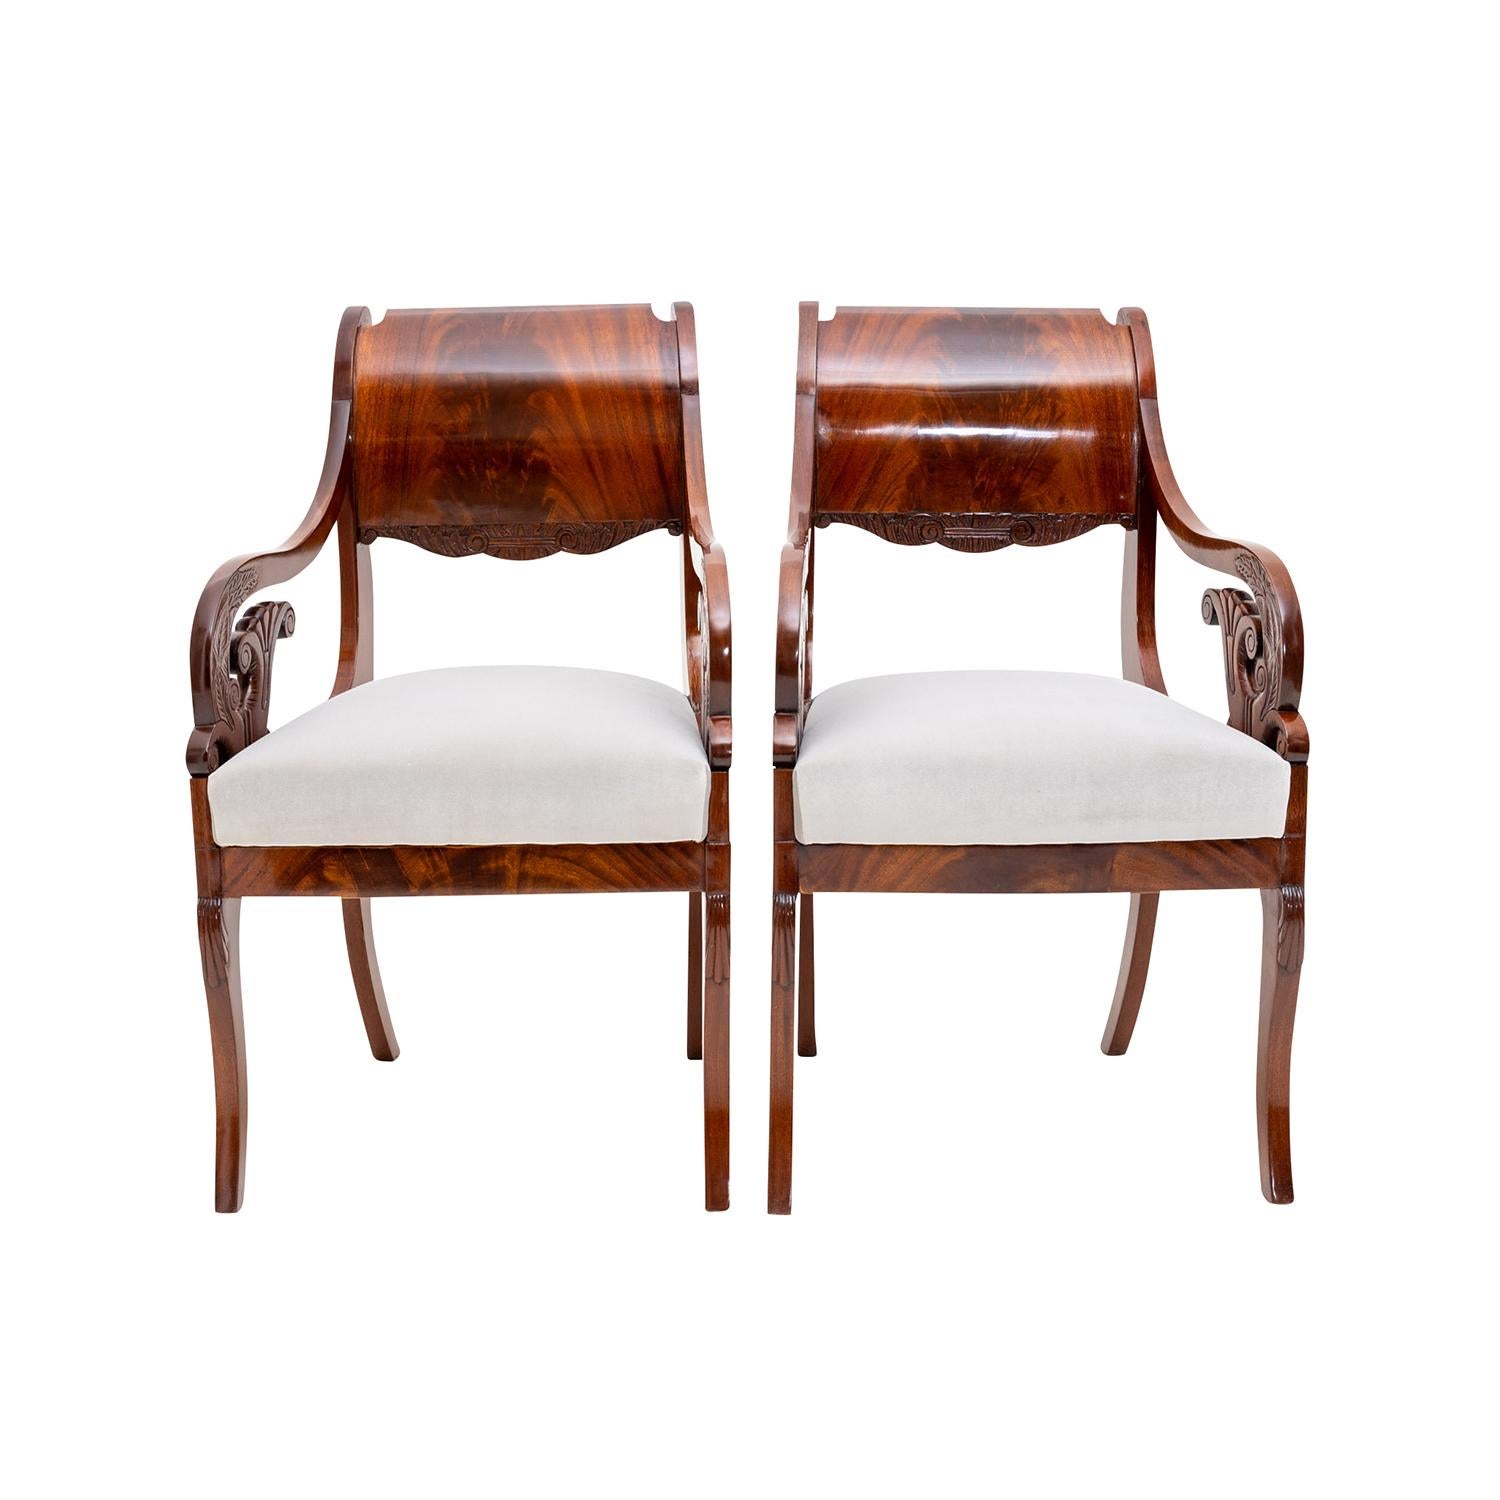 A dark-brown, antique Baltic Biedermeier pair of armchairs made of handcrafted polished Mahogany, in good condition. The particularized veneered carved side chairs have a wide arched backrest withs slim arms, standing on four slightly curved wooden